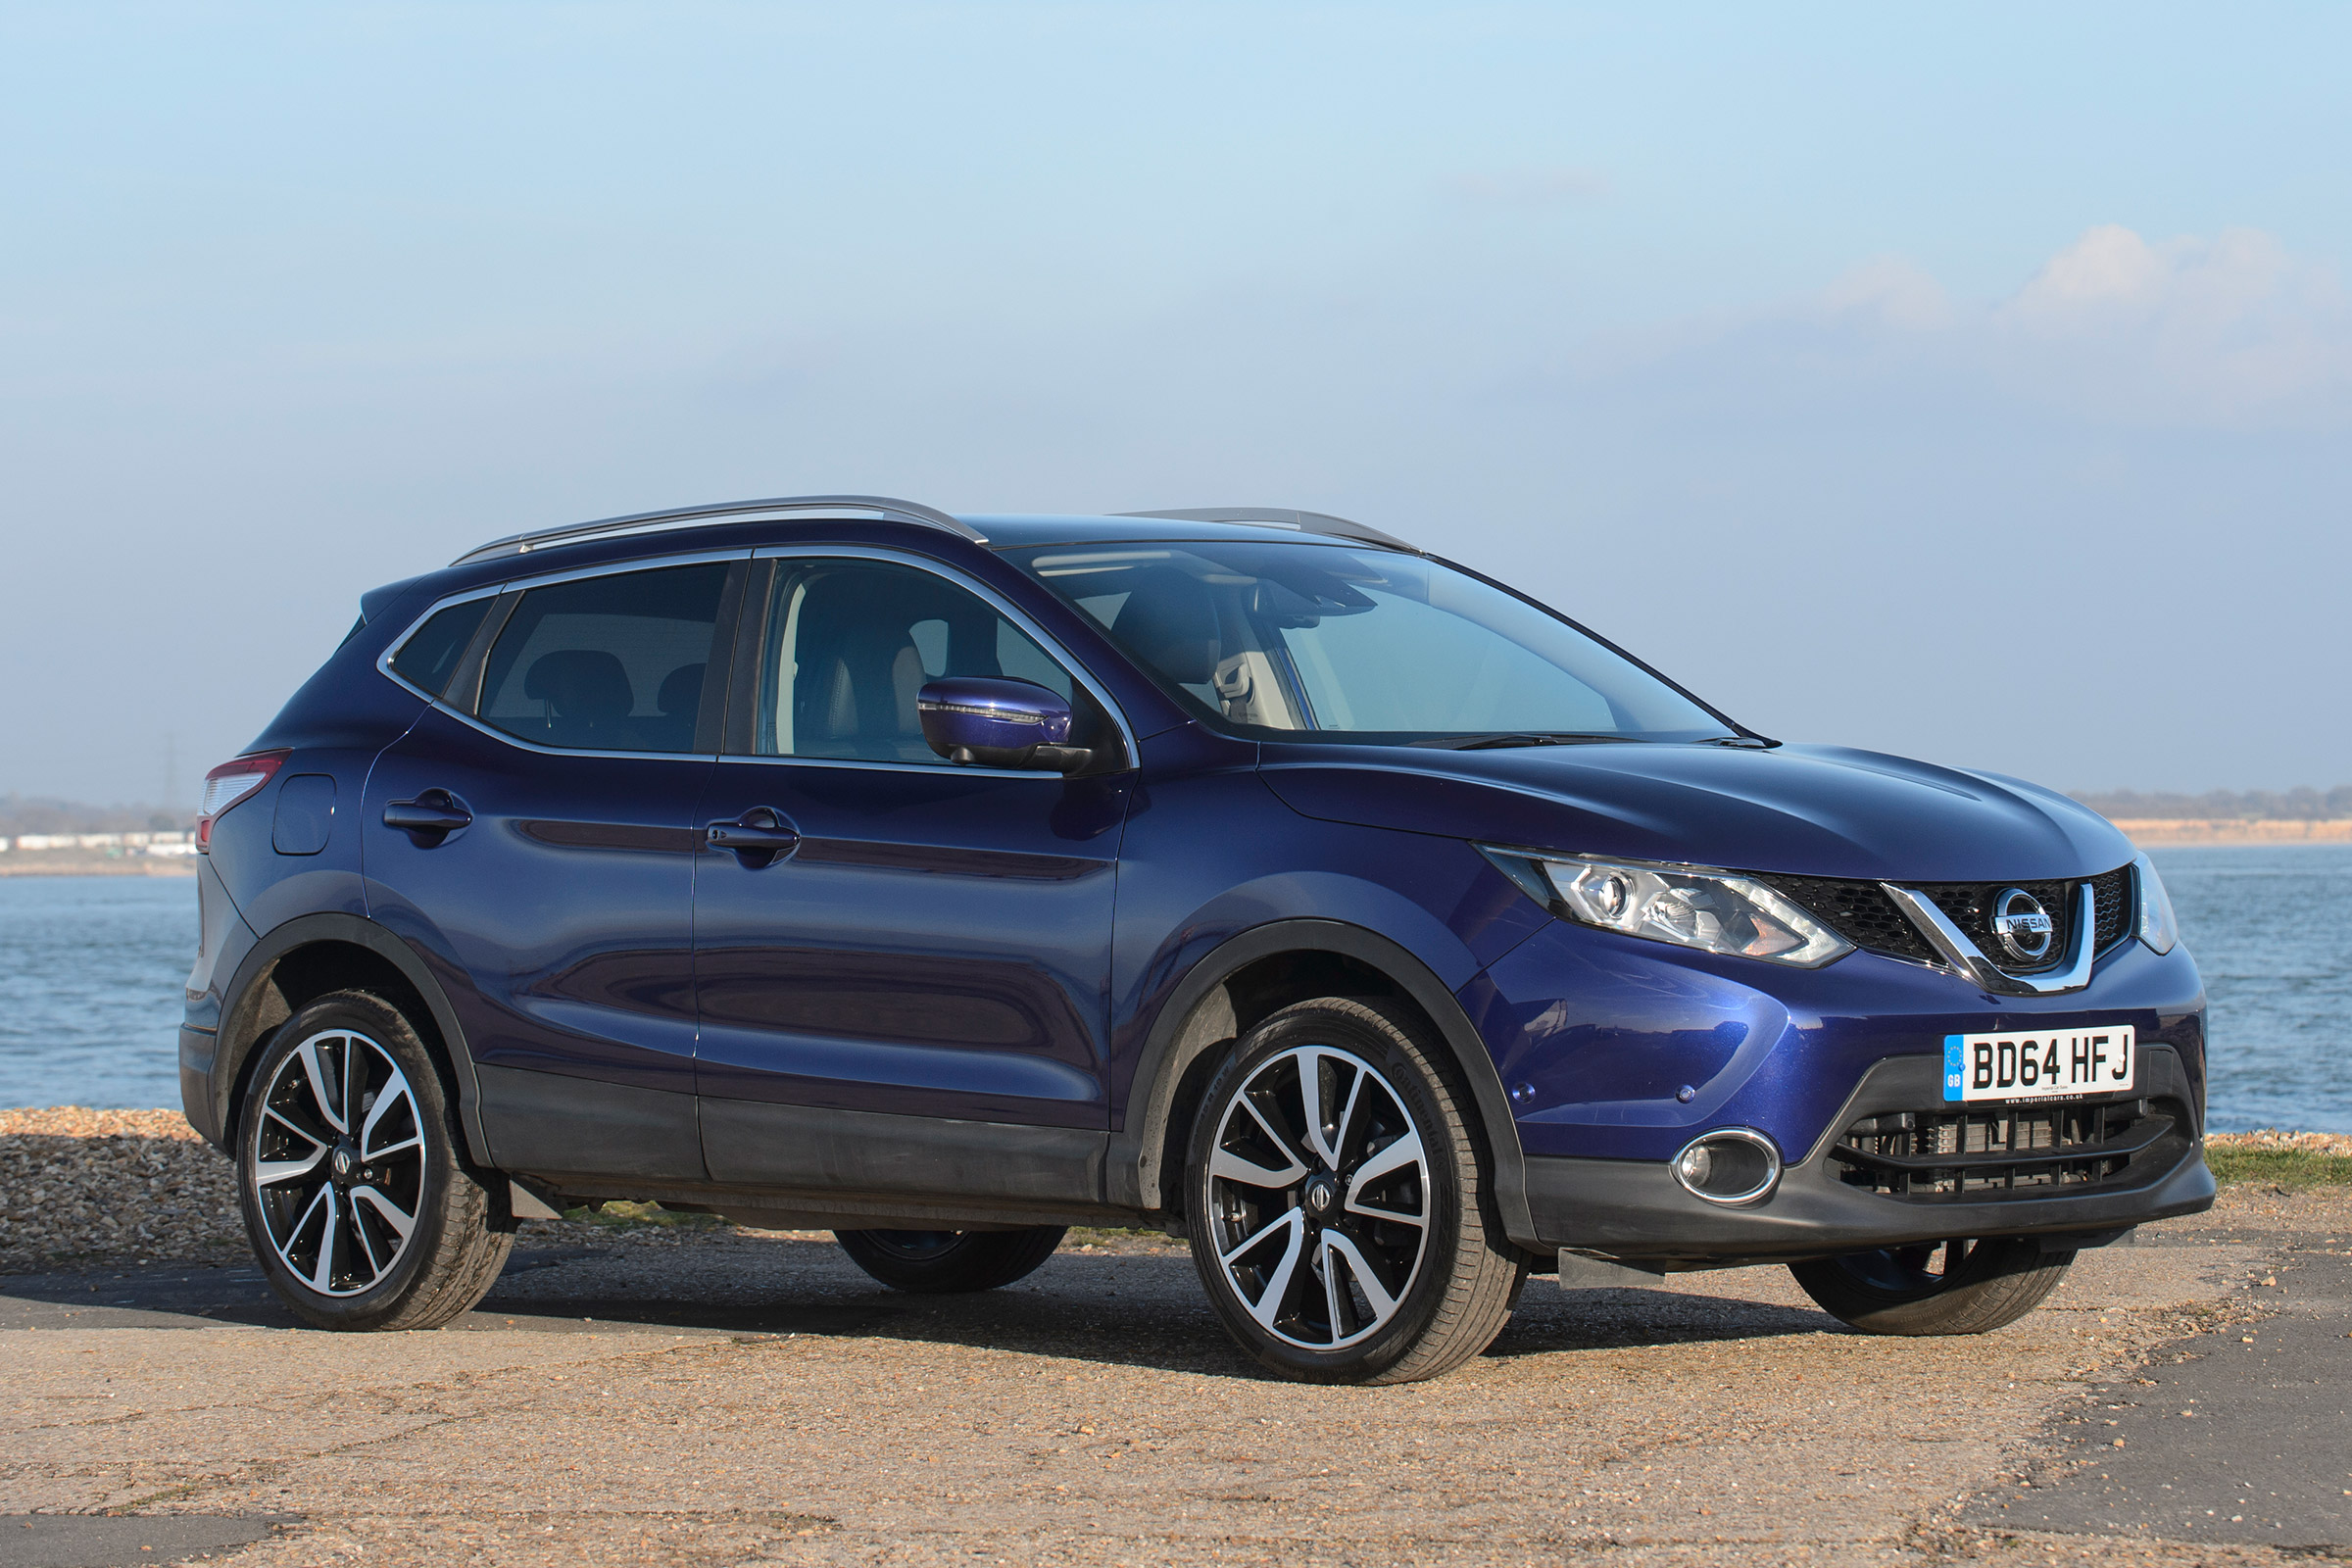 Used Nissan Qashqai review Auto Express